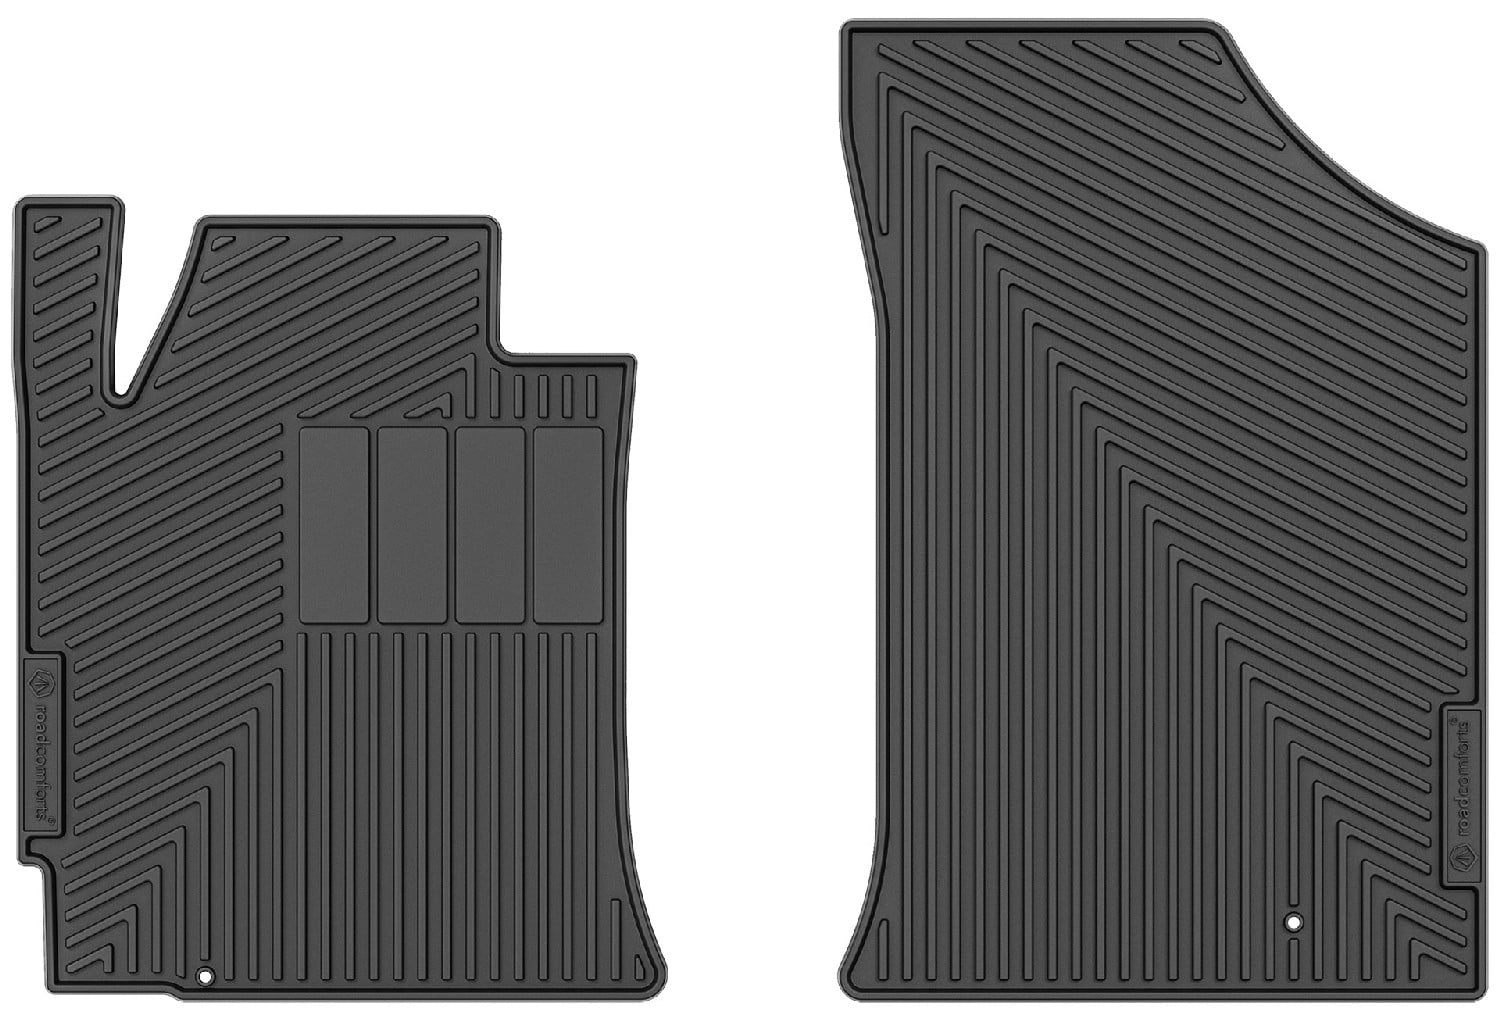 RoadComforts RC44179 Custom Fit All-Weather Floor Mats for 2012 Nissan Altima 2-Piece First Row 2012 Nissan Altima All Weather Floor Mats